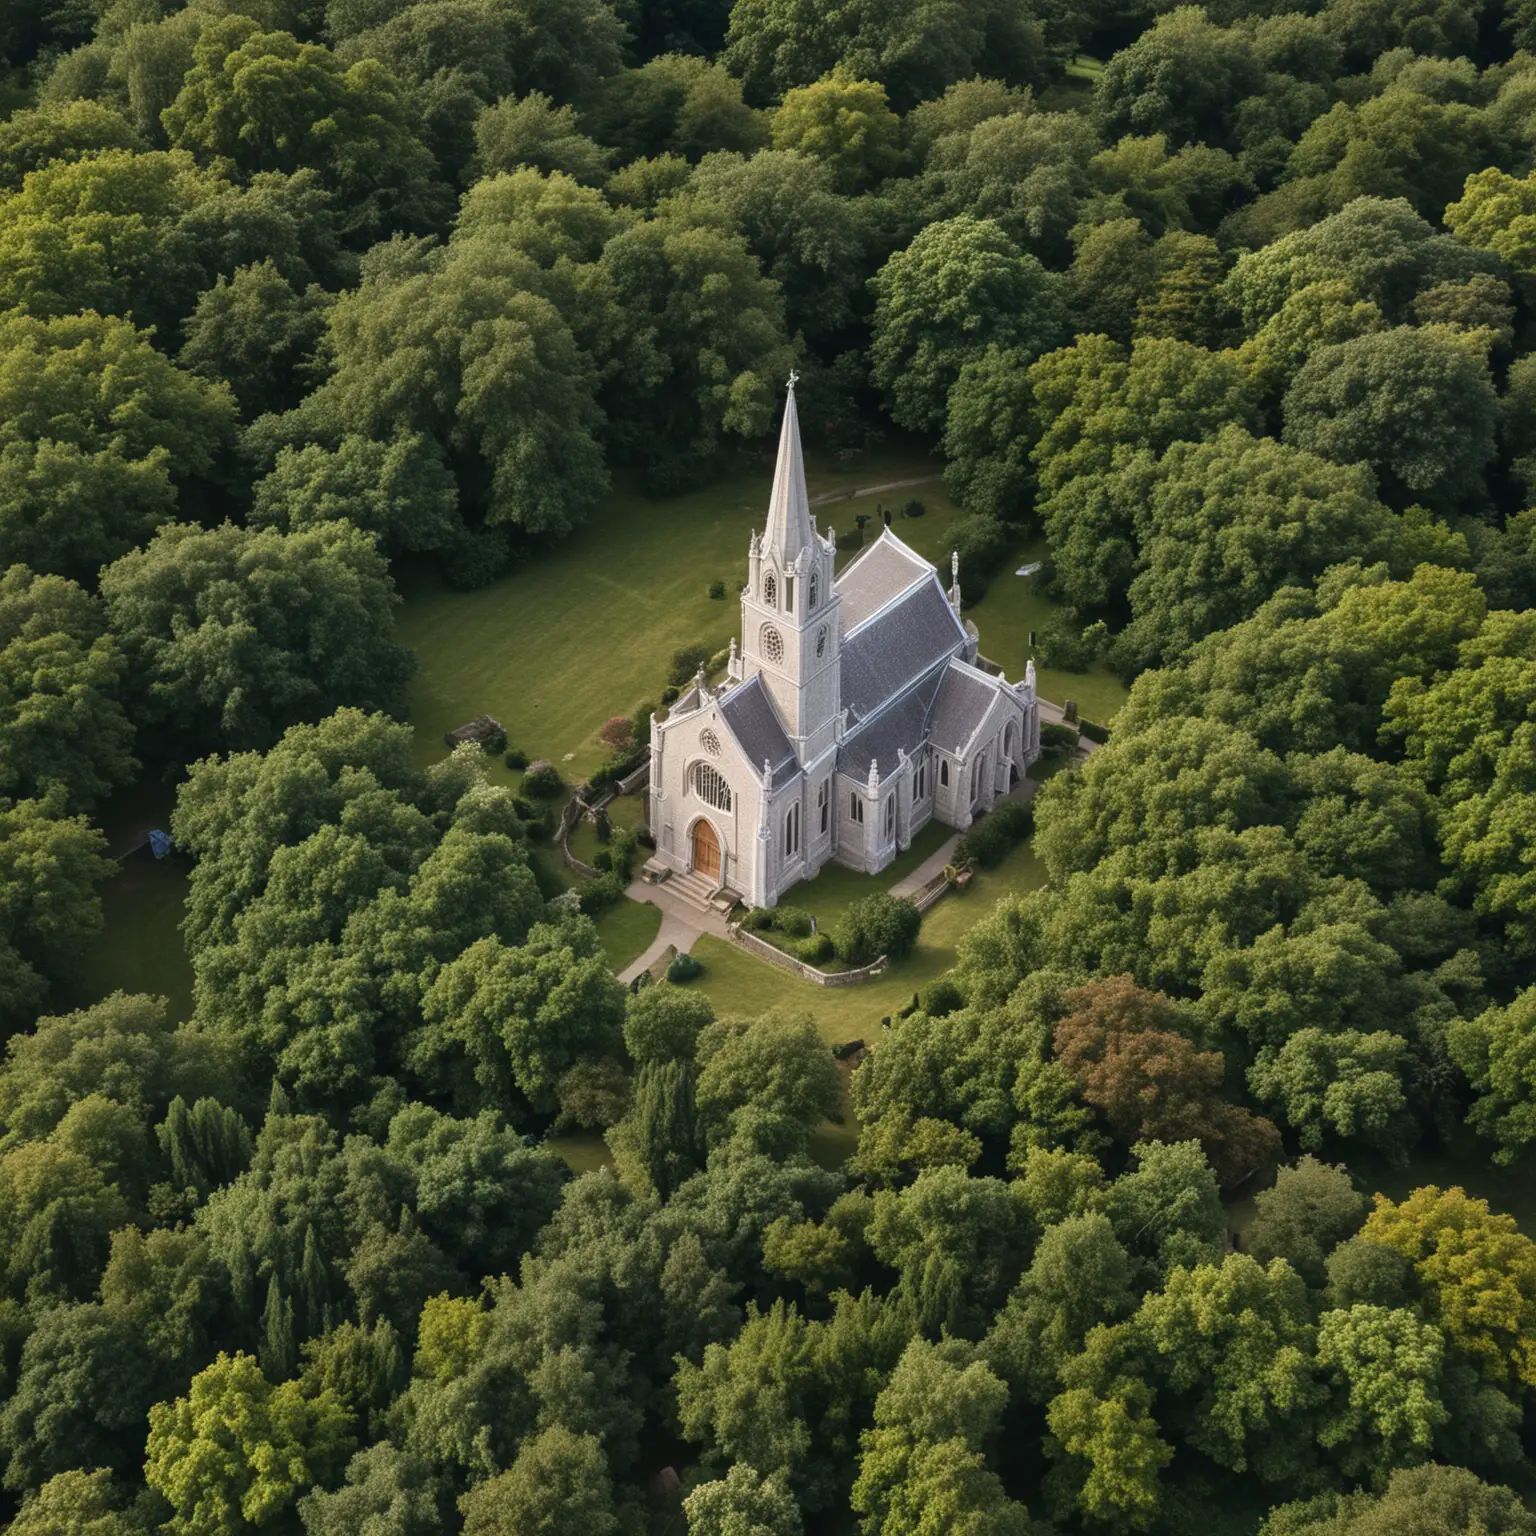 small english church surrounded by trees from above

